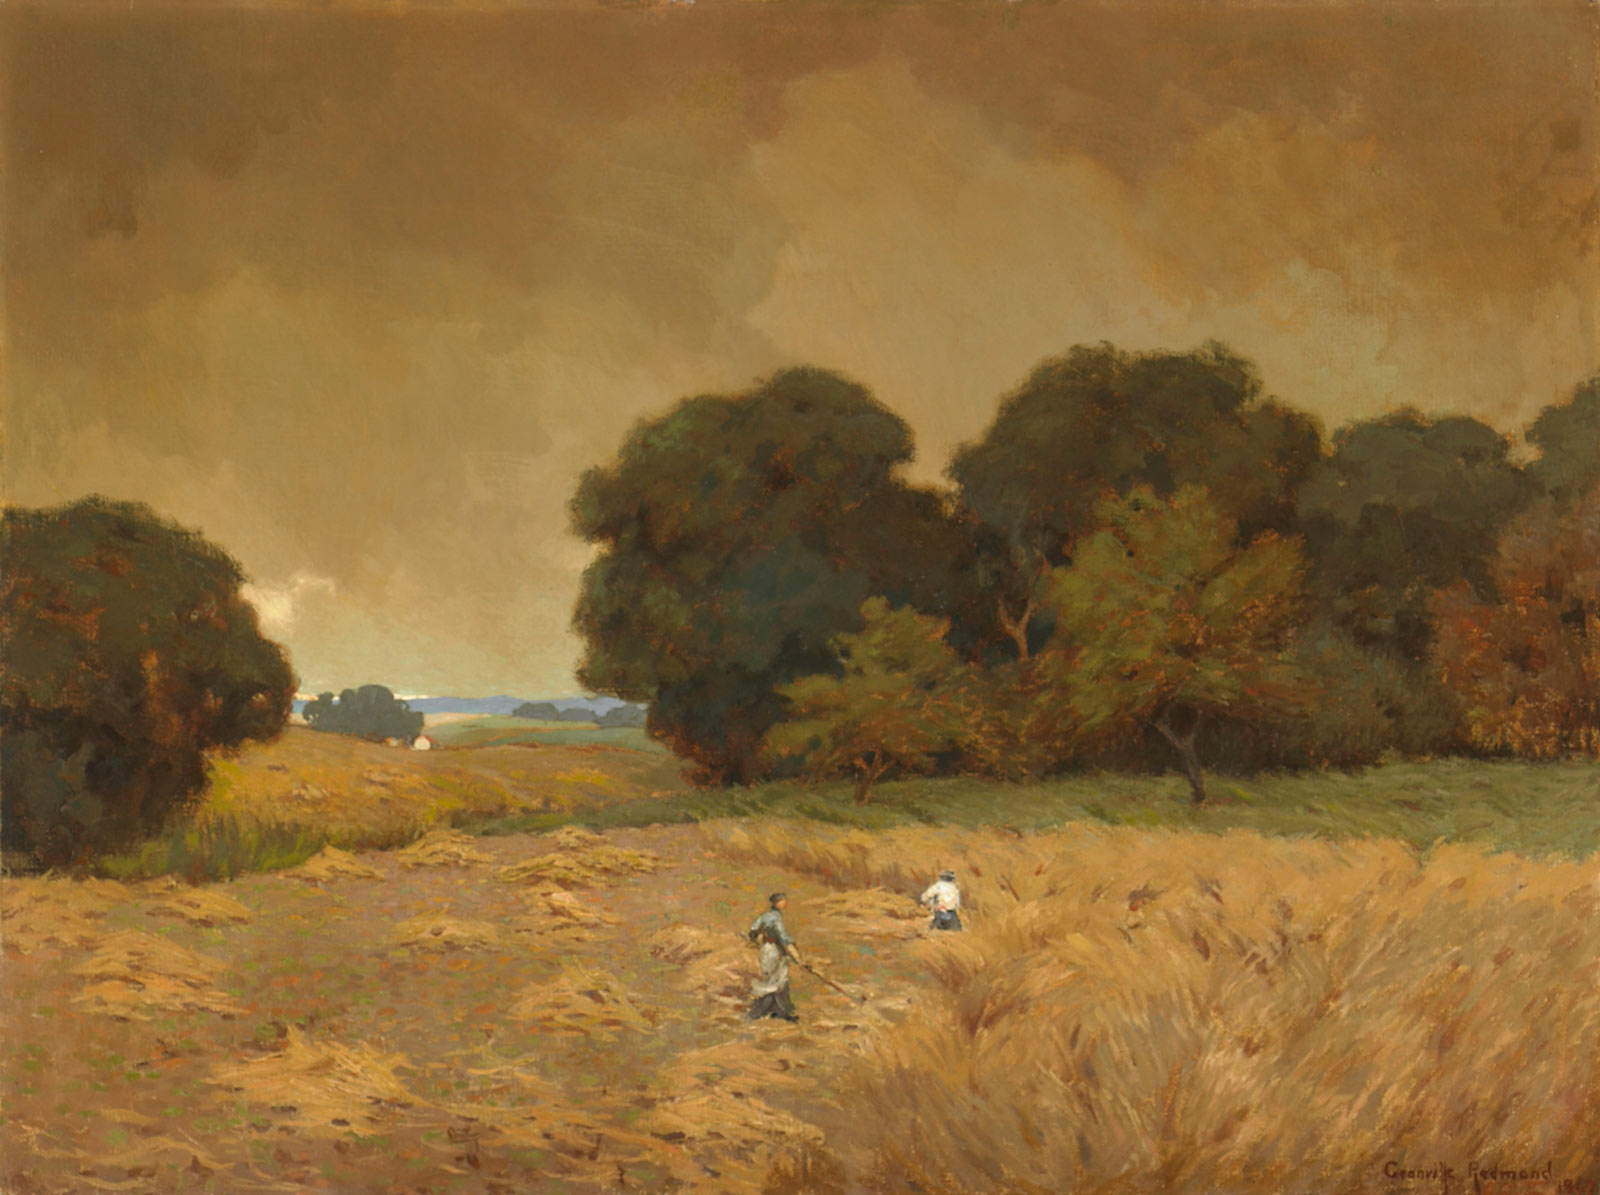 The Mowers (When Hearts Beat as One) by Granville Redmond